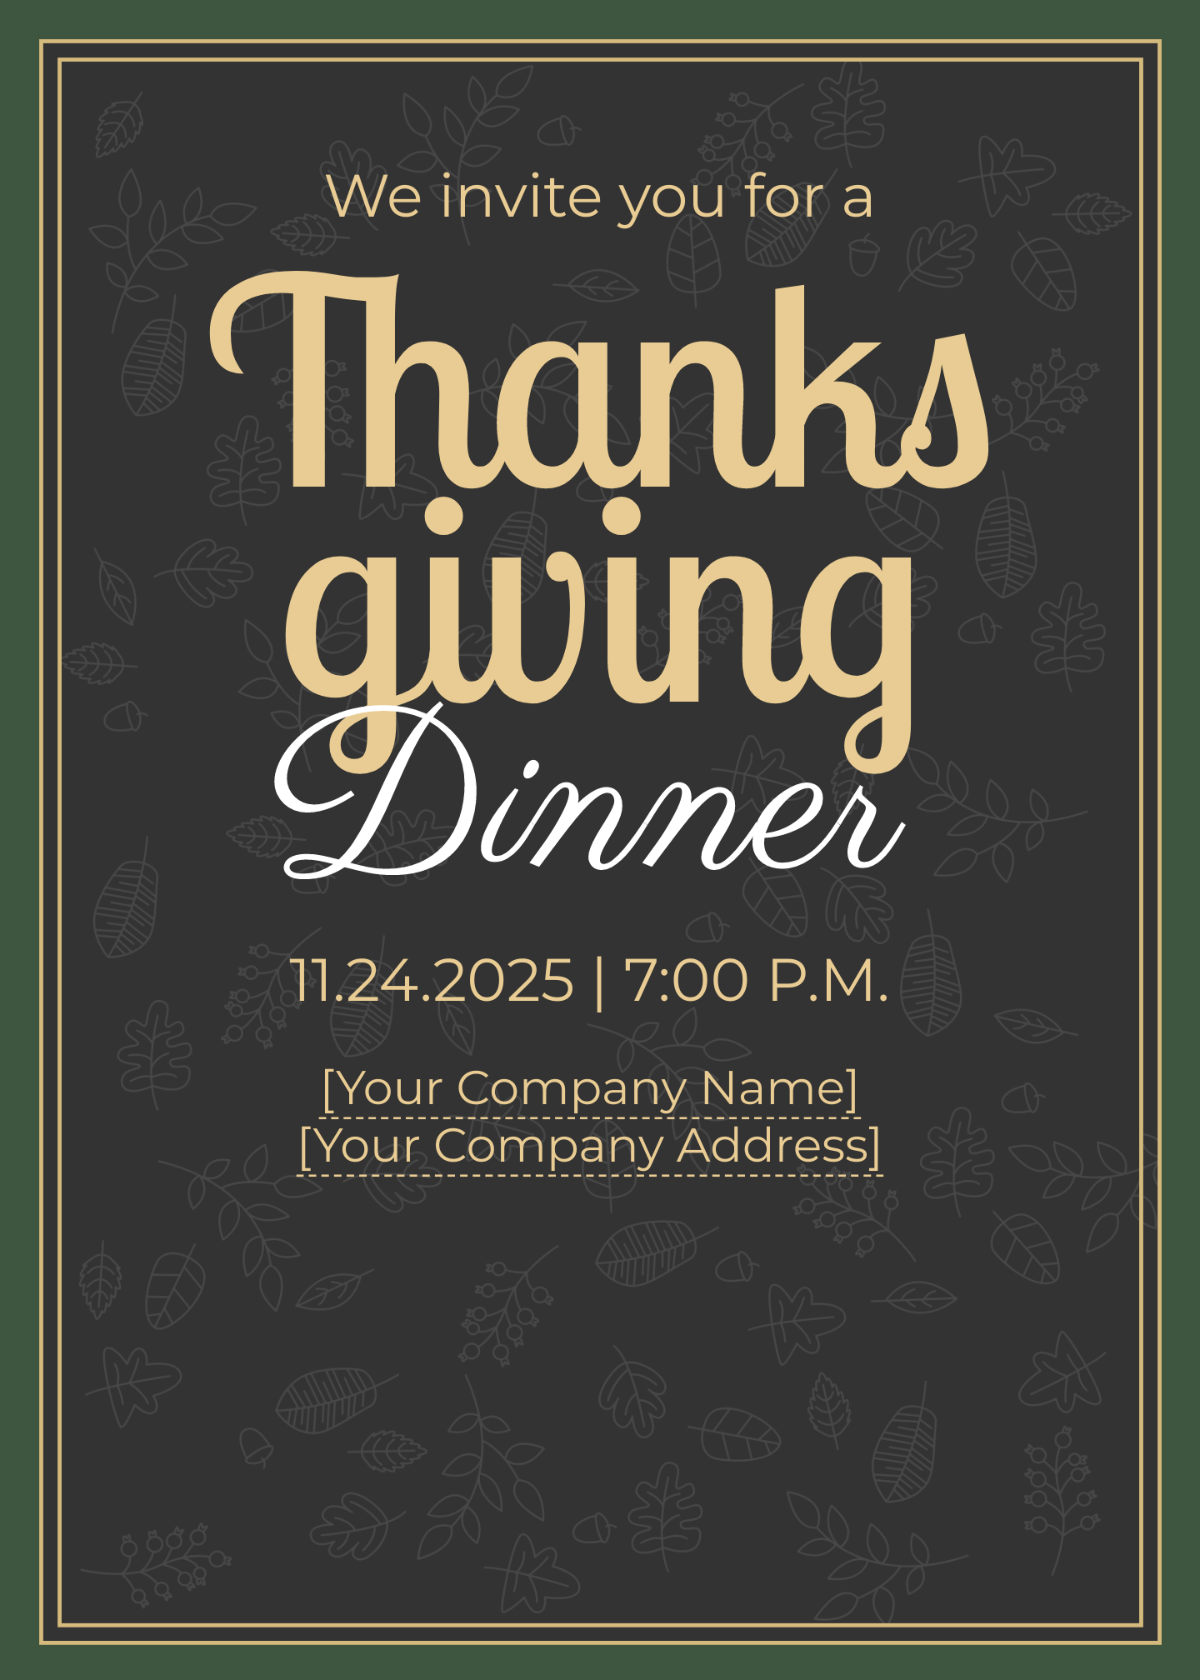 Thanksgiving Invitation for Friends Template